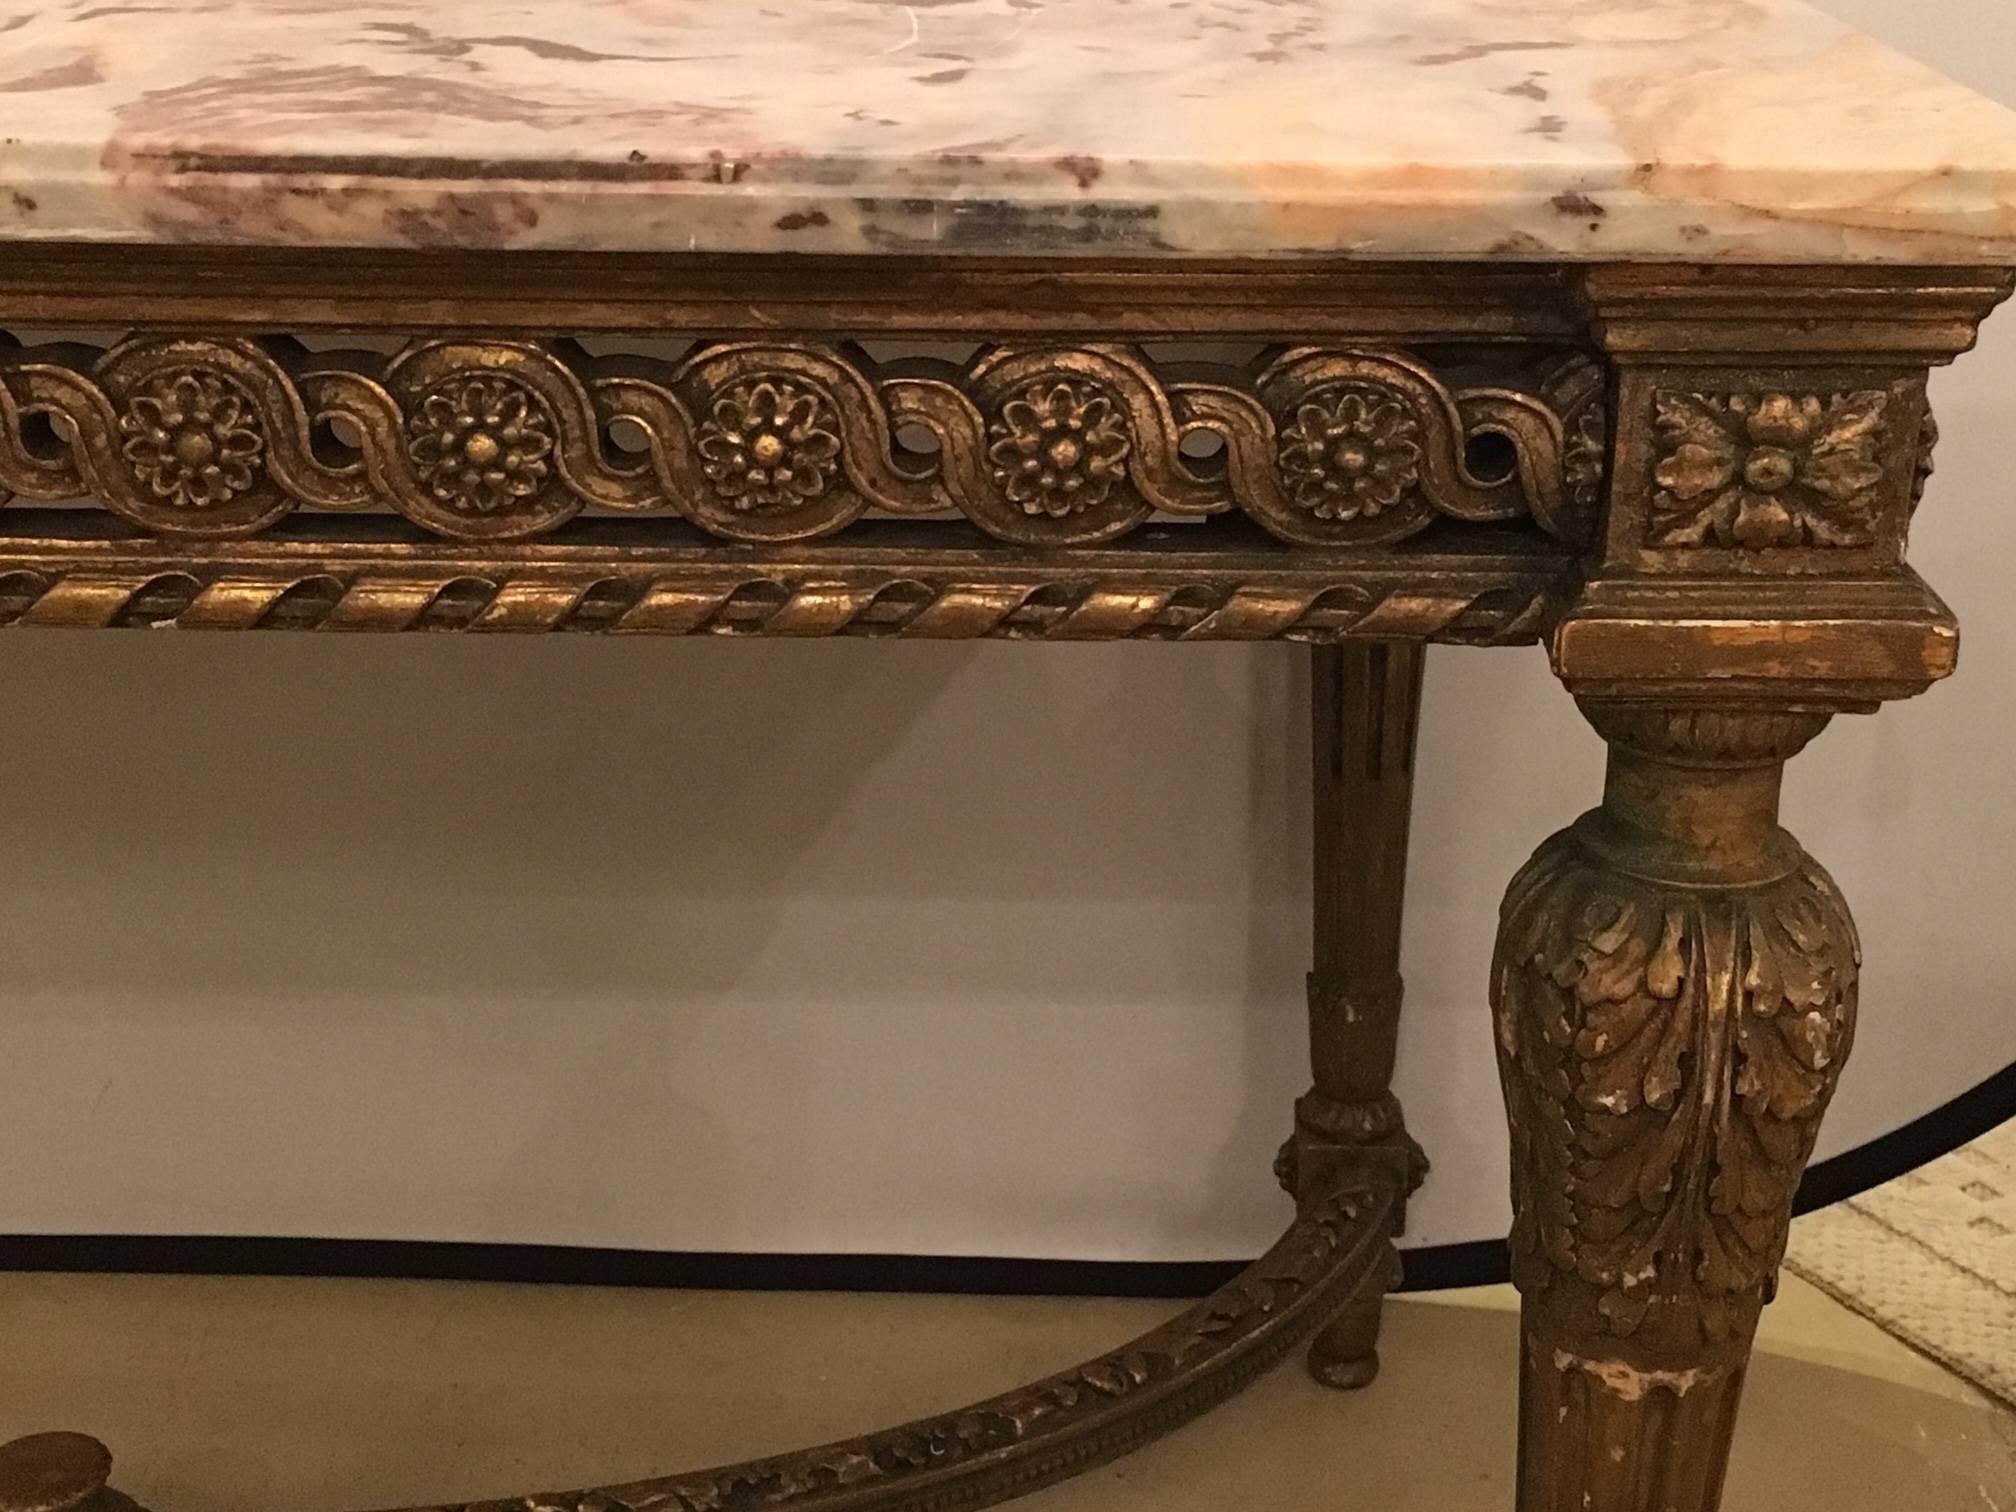 Stamped Jansen centre table having a gilt base and fine pink, grey and white veined marble-top. The top having been professionally repaired. The Louis XVI style centre table having been antique guided. The four corner legs supported by X form carved